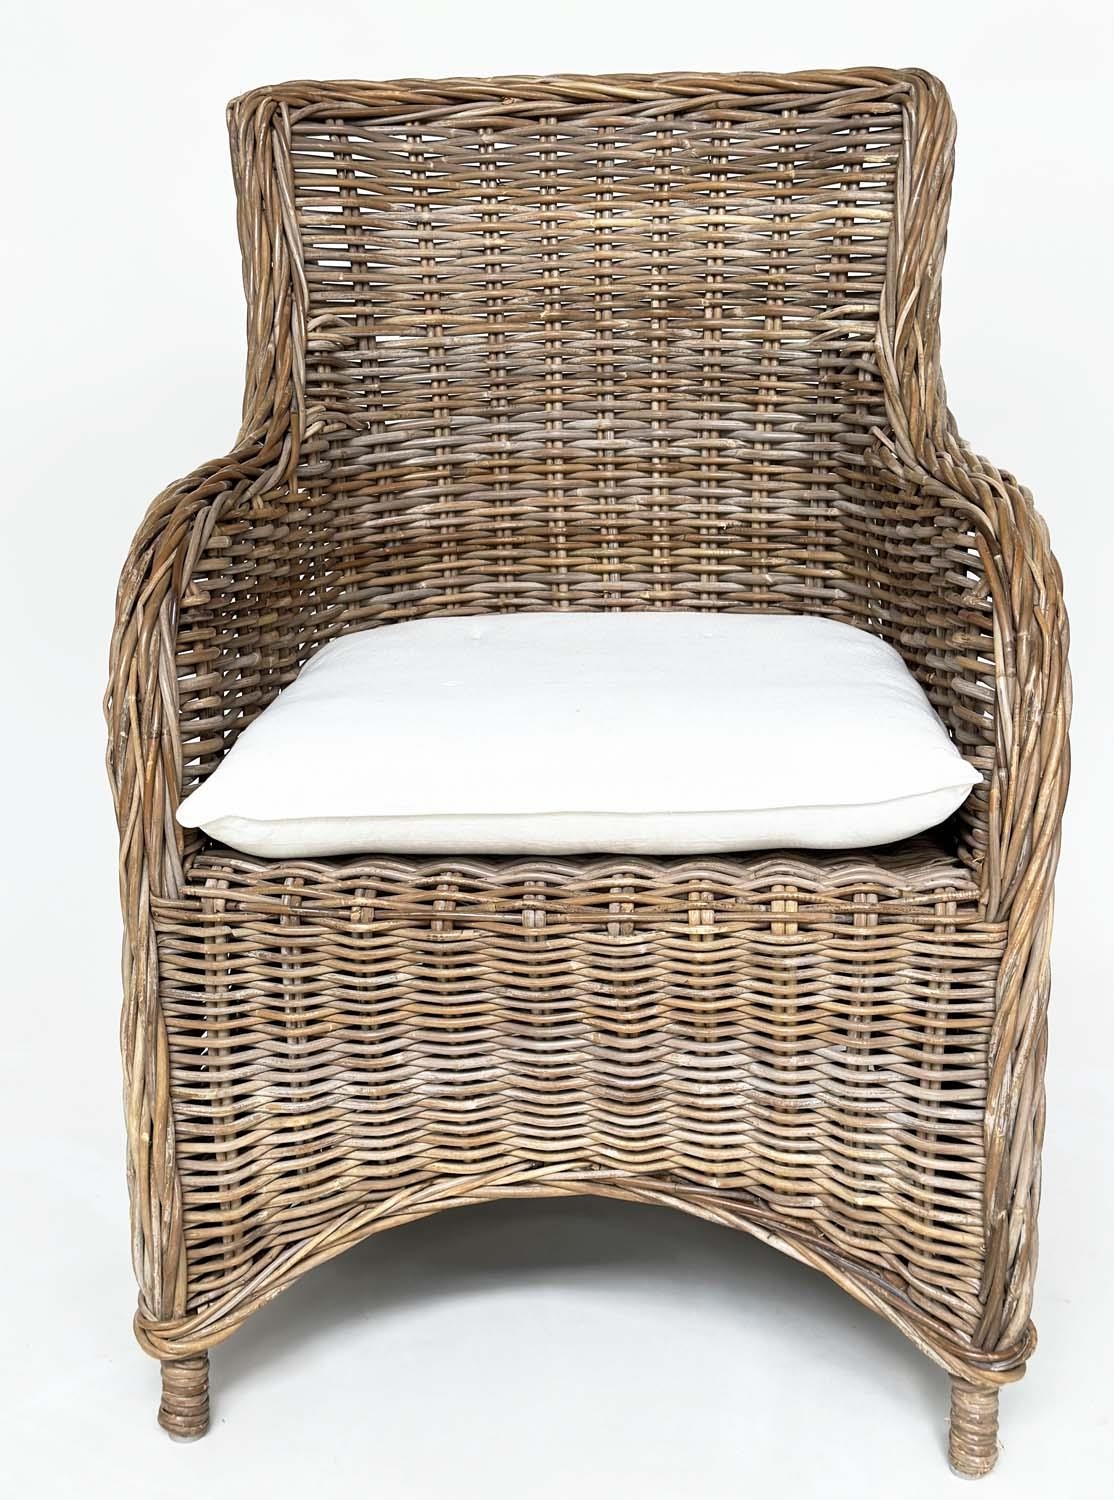 ORANGERY ARMCHAIRS, a pair, rattan framed and woven with cushion seats. (2) - Image 5 of 15